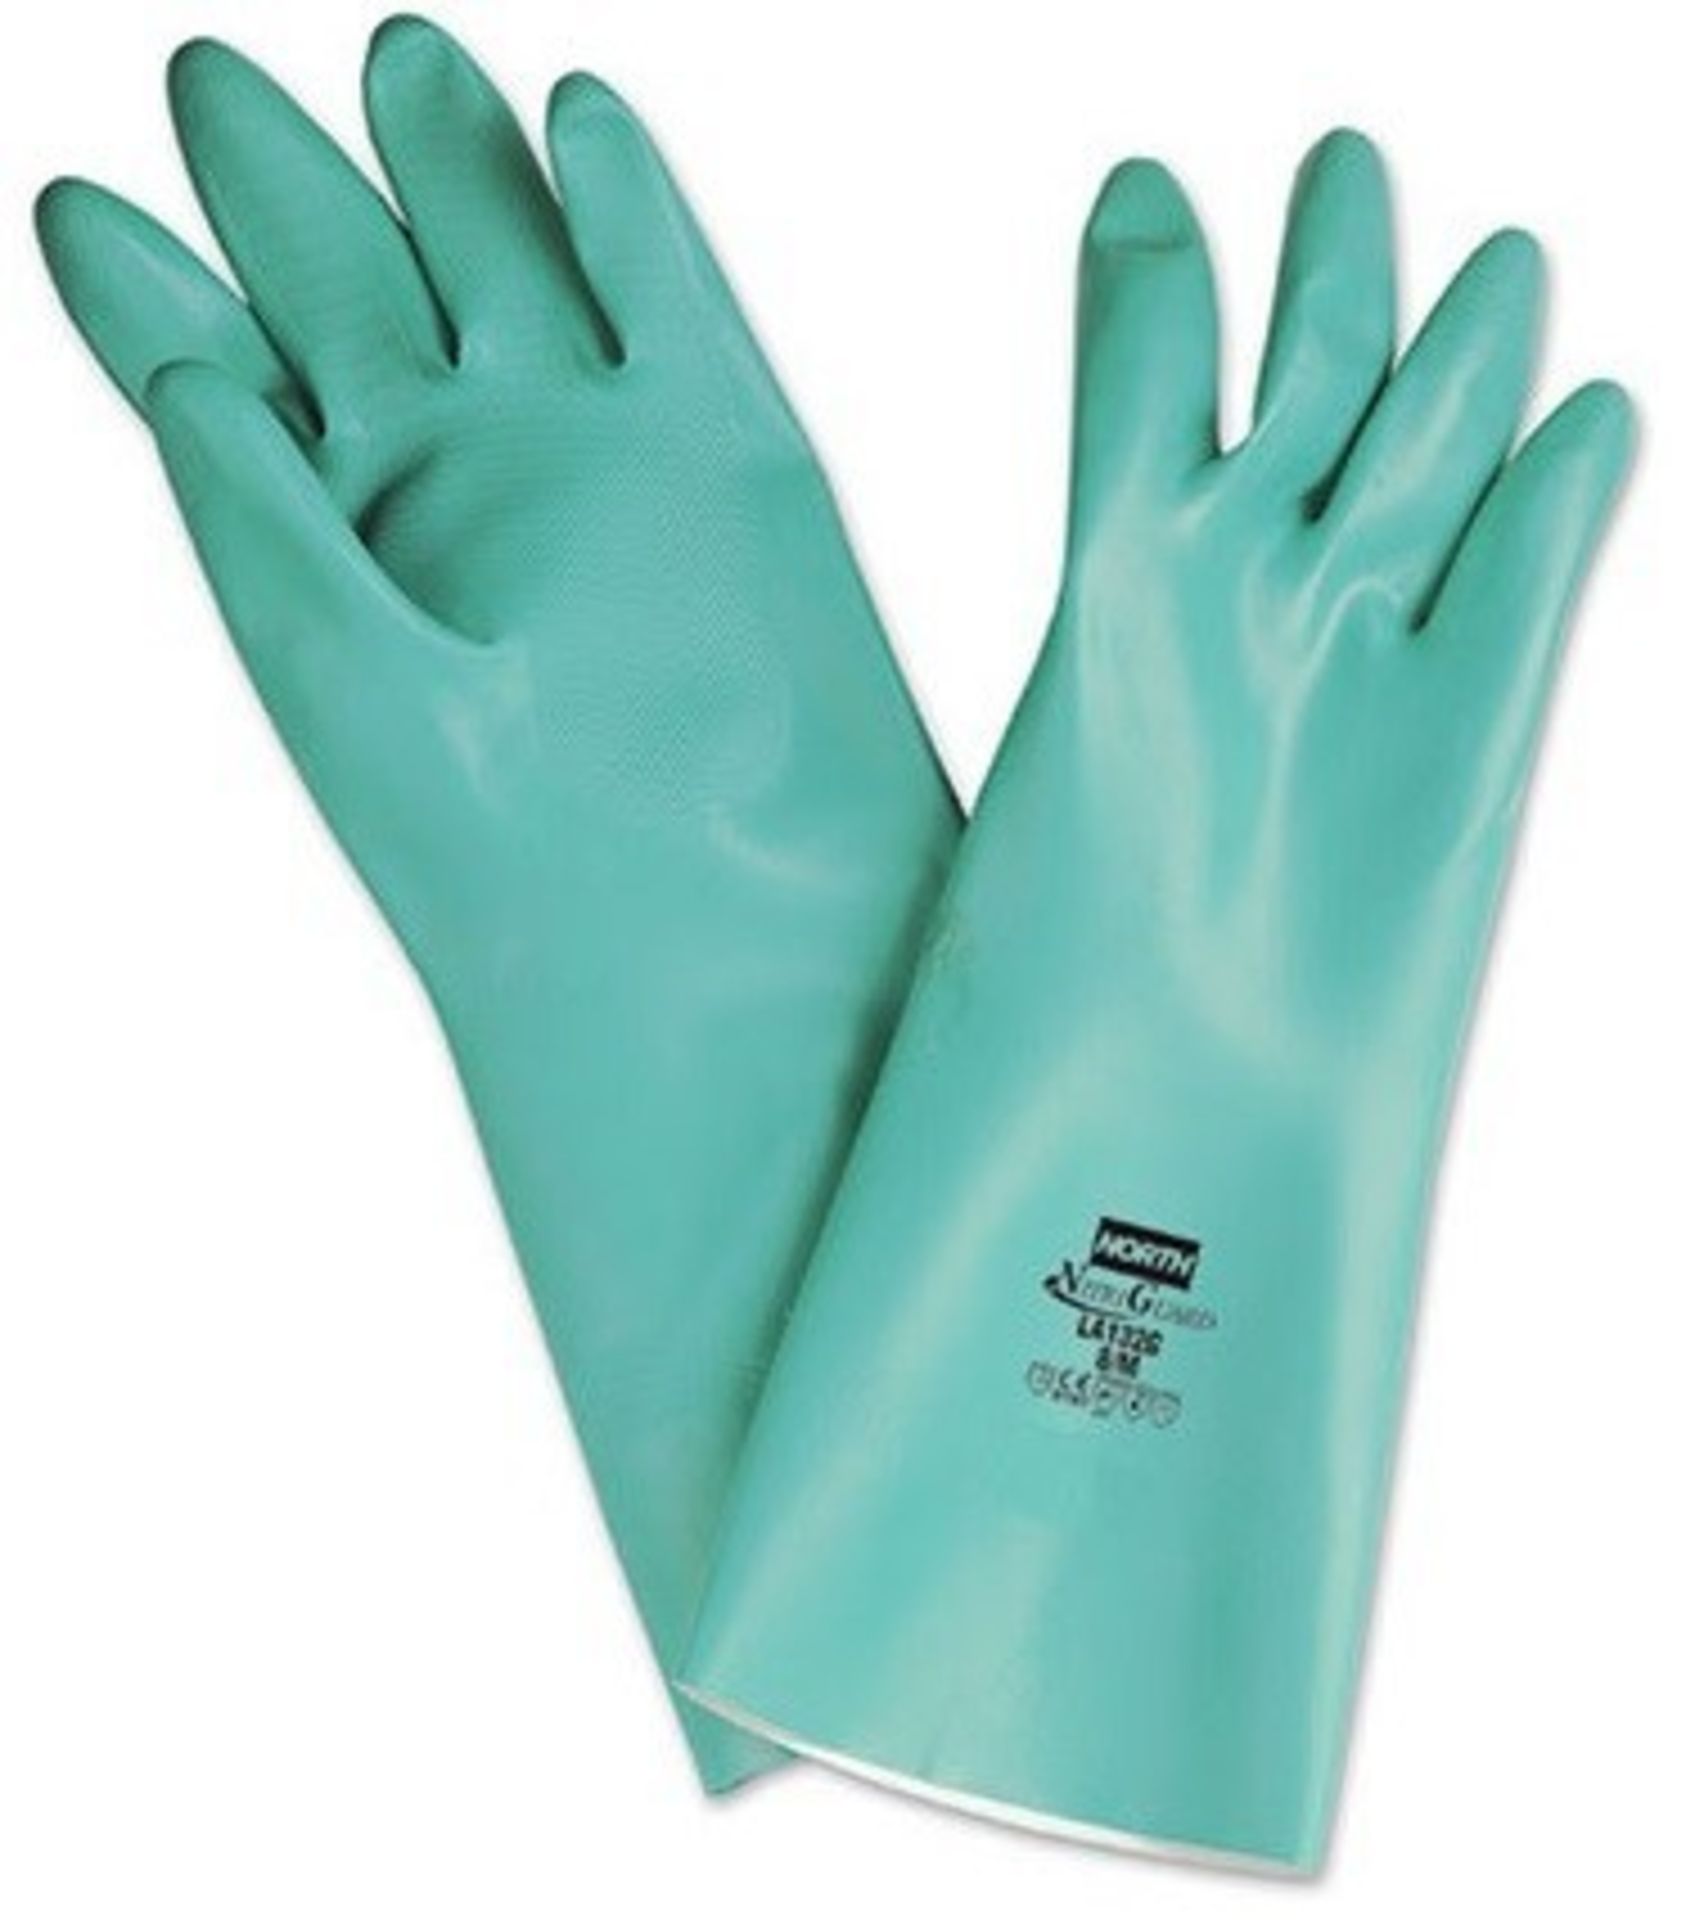 120 x Pairs Of Nitriguard Plus™ Unsupported Nitrile, Chemical Resistant Gloves - 13" Length Size: